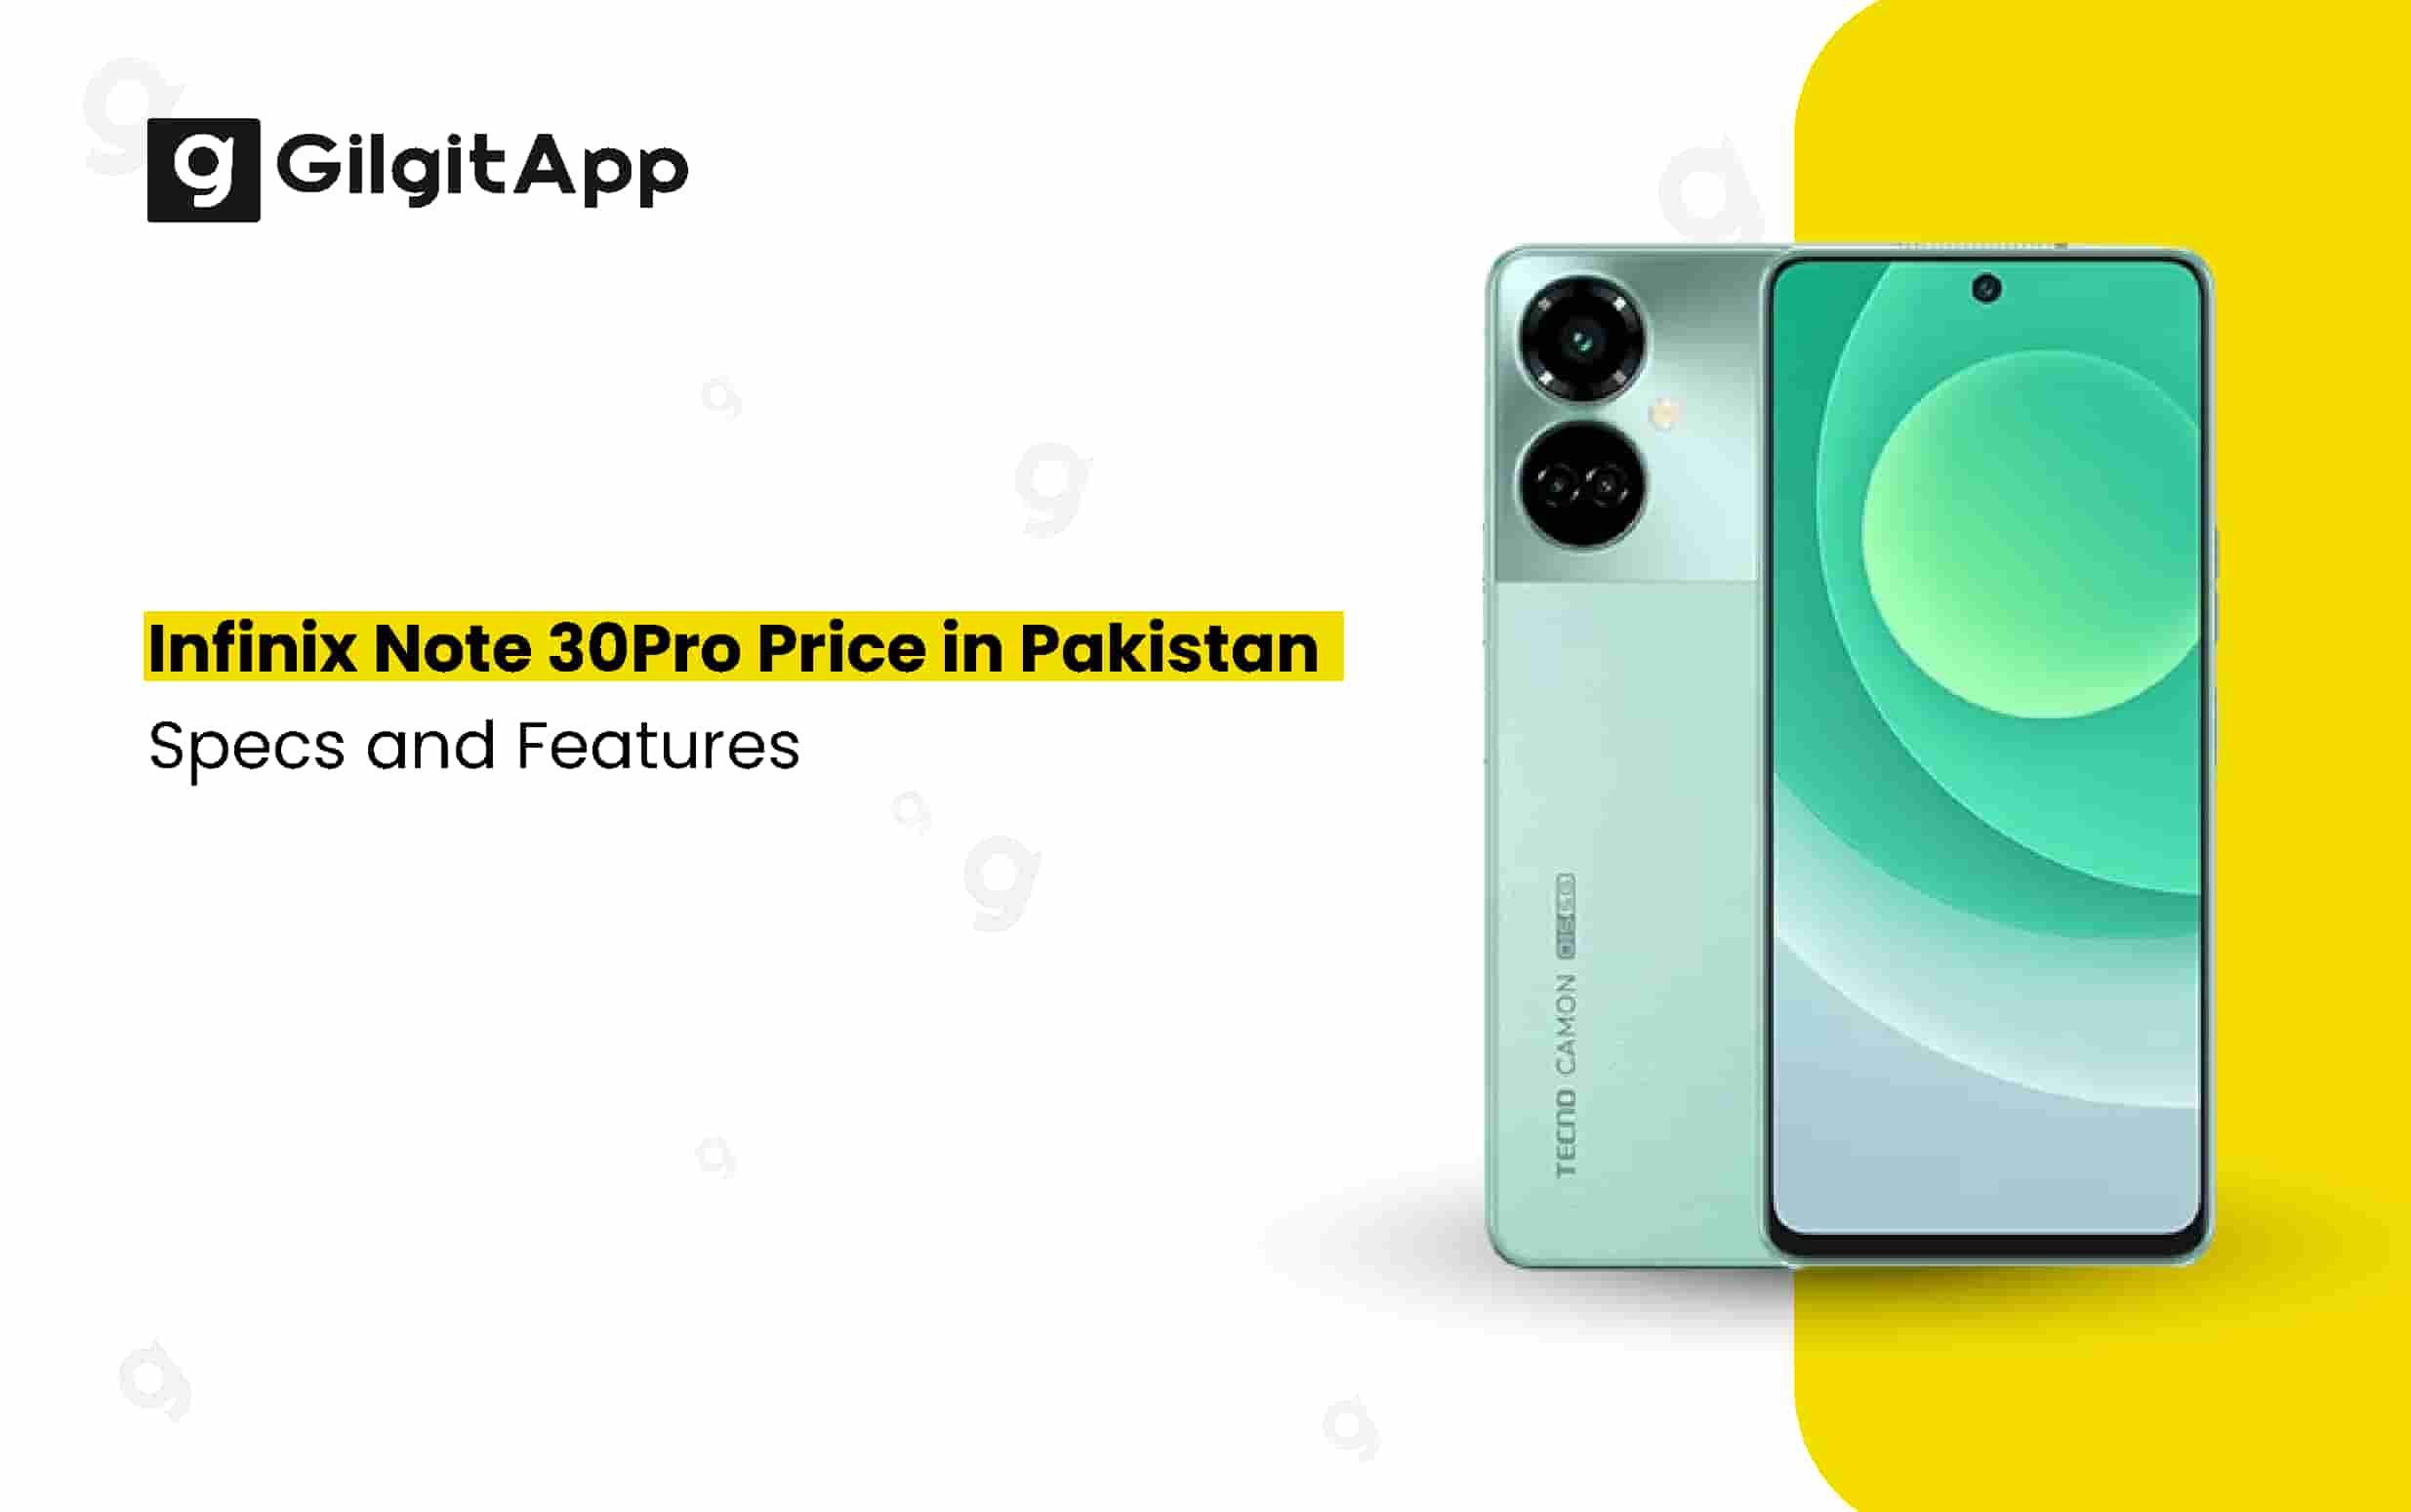 Infinix Note 30 Pro Price in Pakistan, Specs and Features 2023